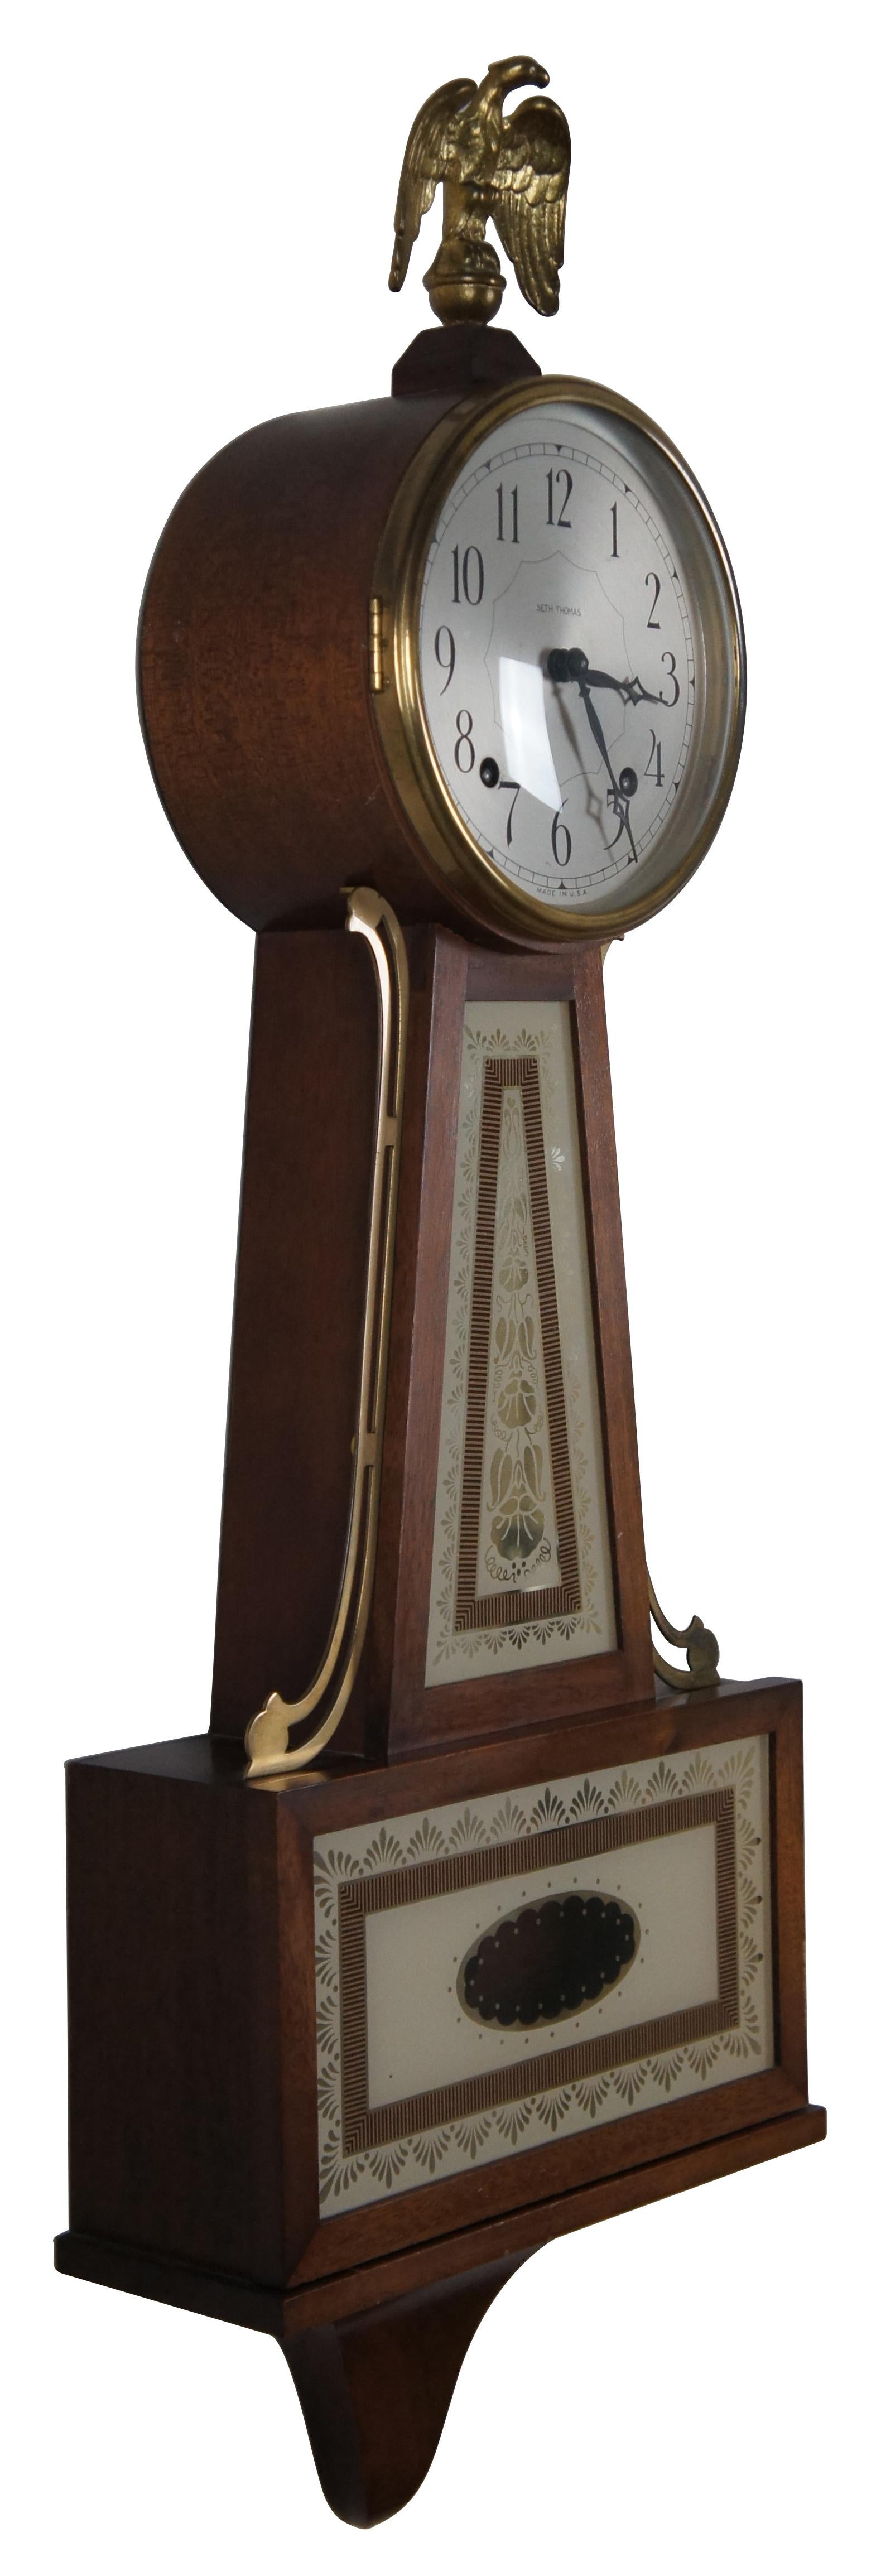 Vintage 1950s Seth Thomas Brookfield Colonial banjo style 8-day spring wound, pendulum, chiming wall clock with eagle finial. “Fabulous re-creation of the circa 1810 Willard Banjo Clock. Brass eagle and trim, convex crystal, strikes the half-hour